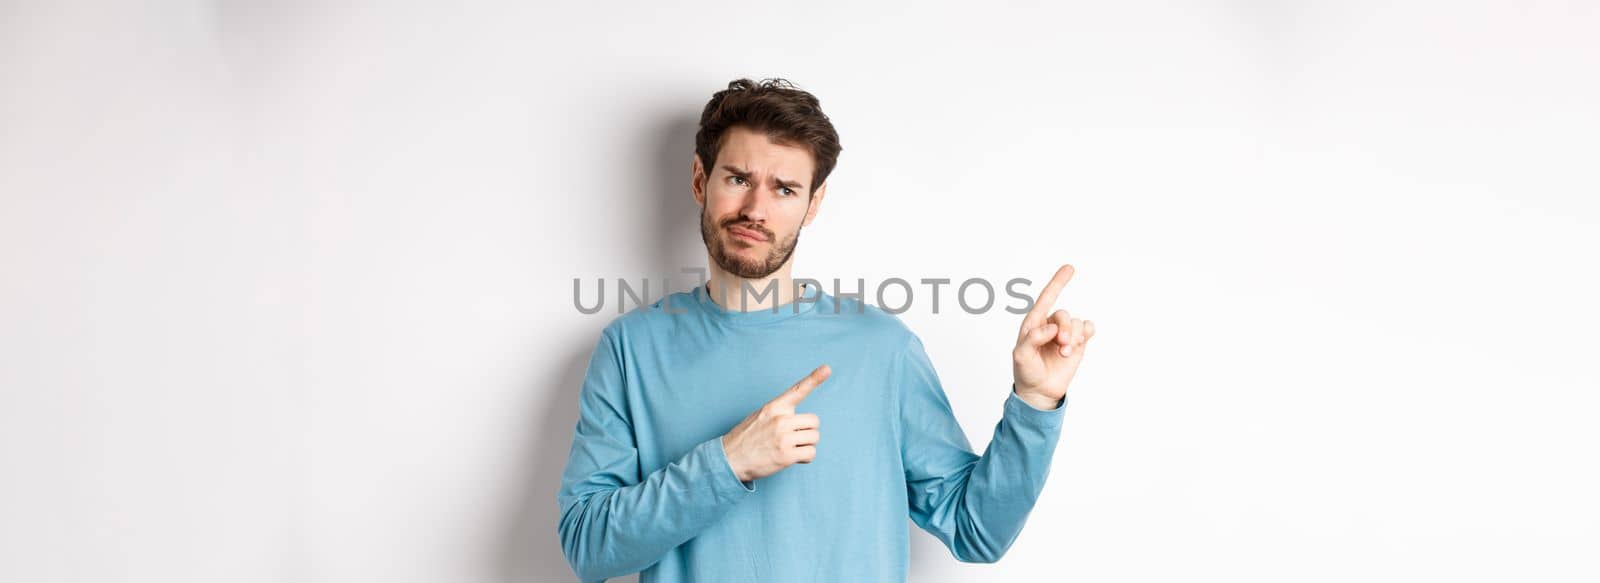 Skeptical and unimpressed young man grimacing, pointing fingers and looking at bad promotion, standing dissatisfied over white background.